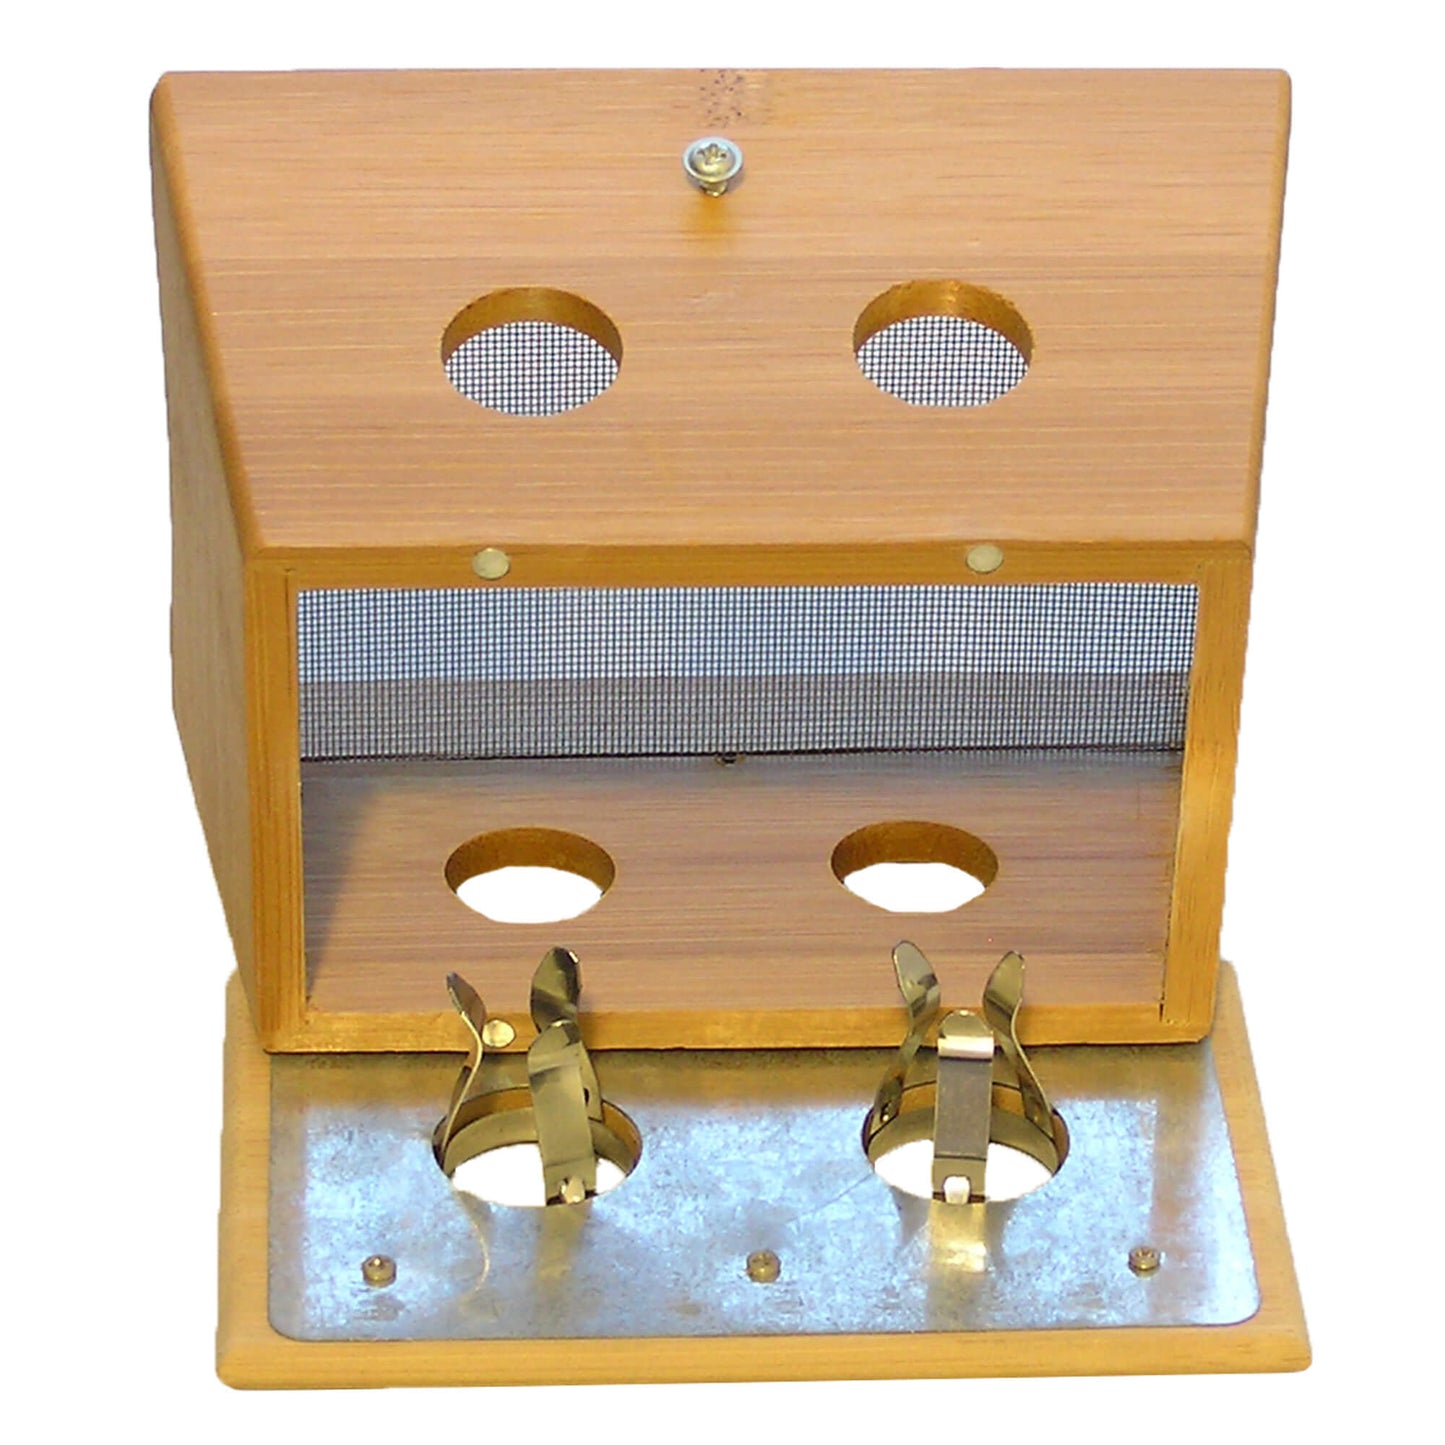 Wooden moxa box for 2 cigars